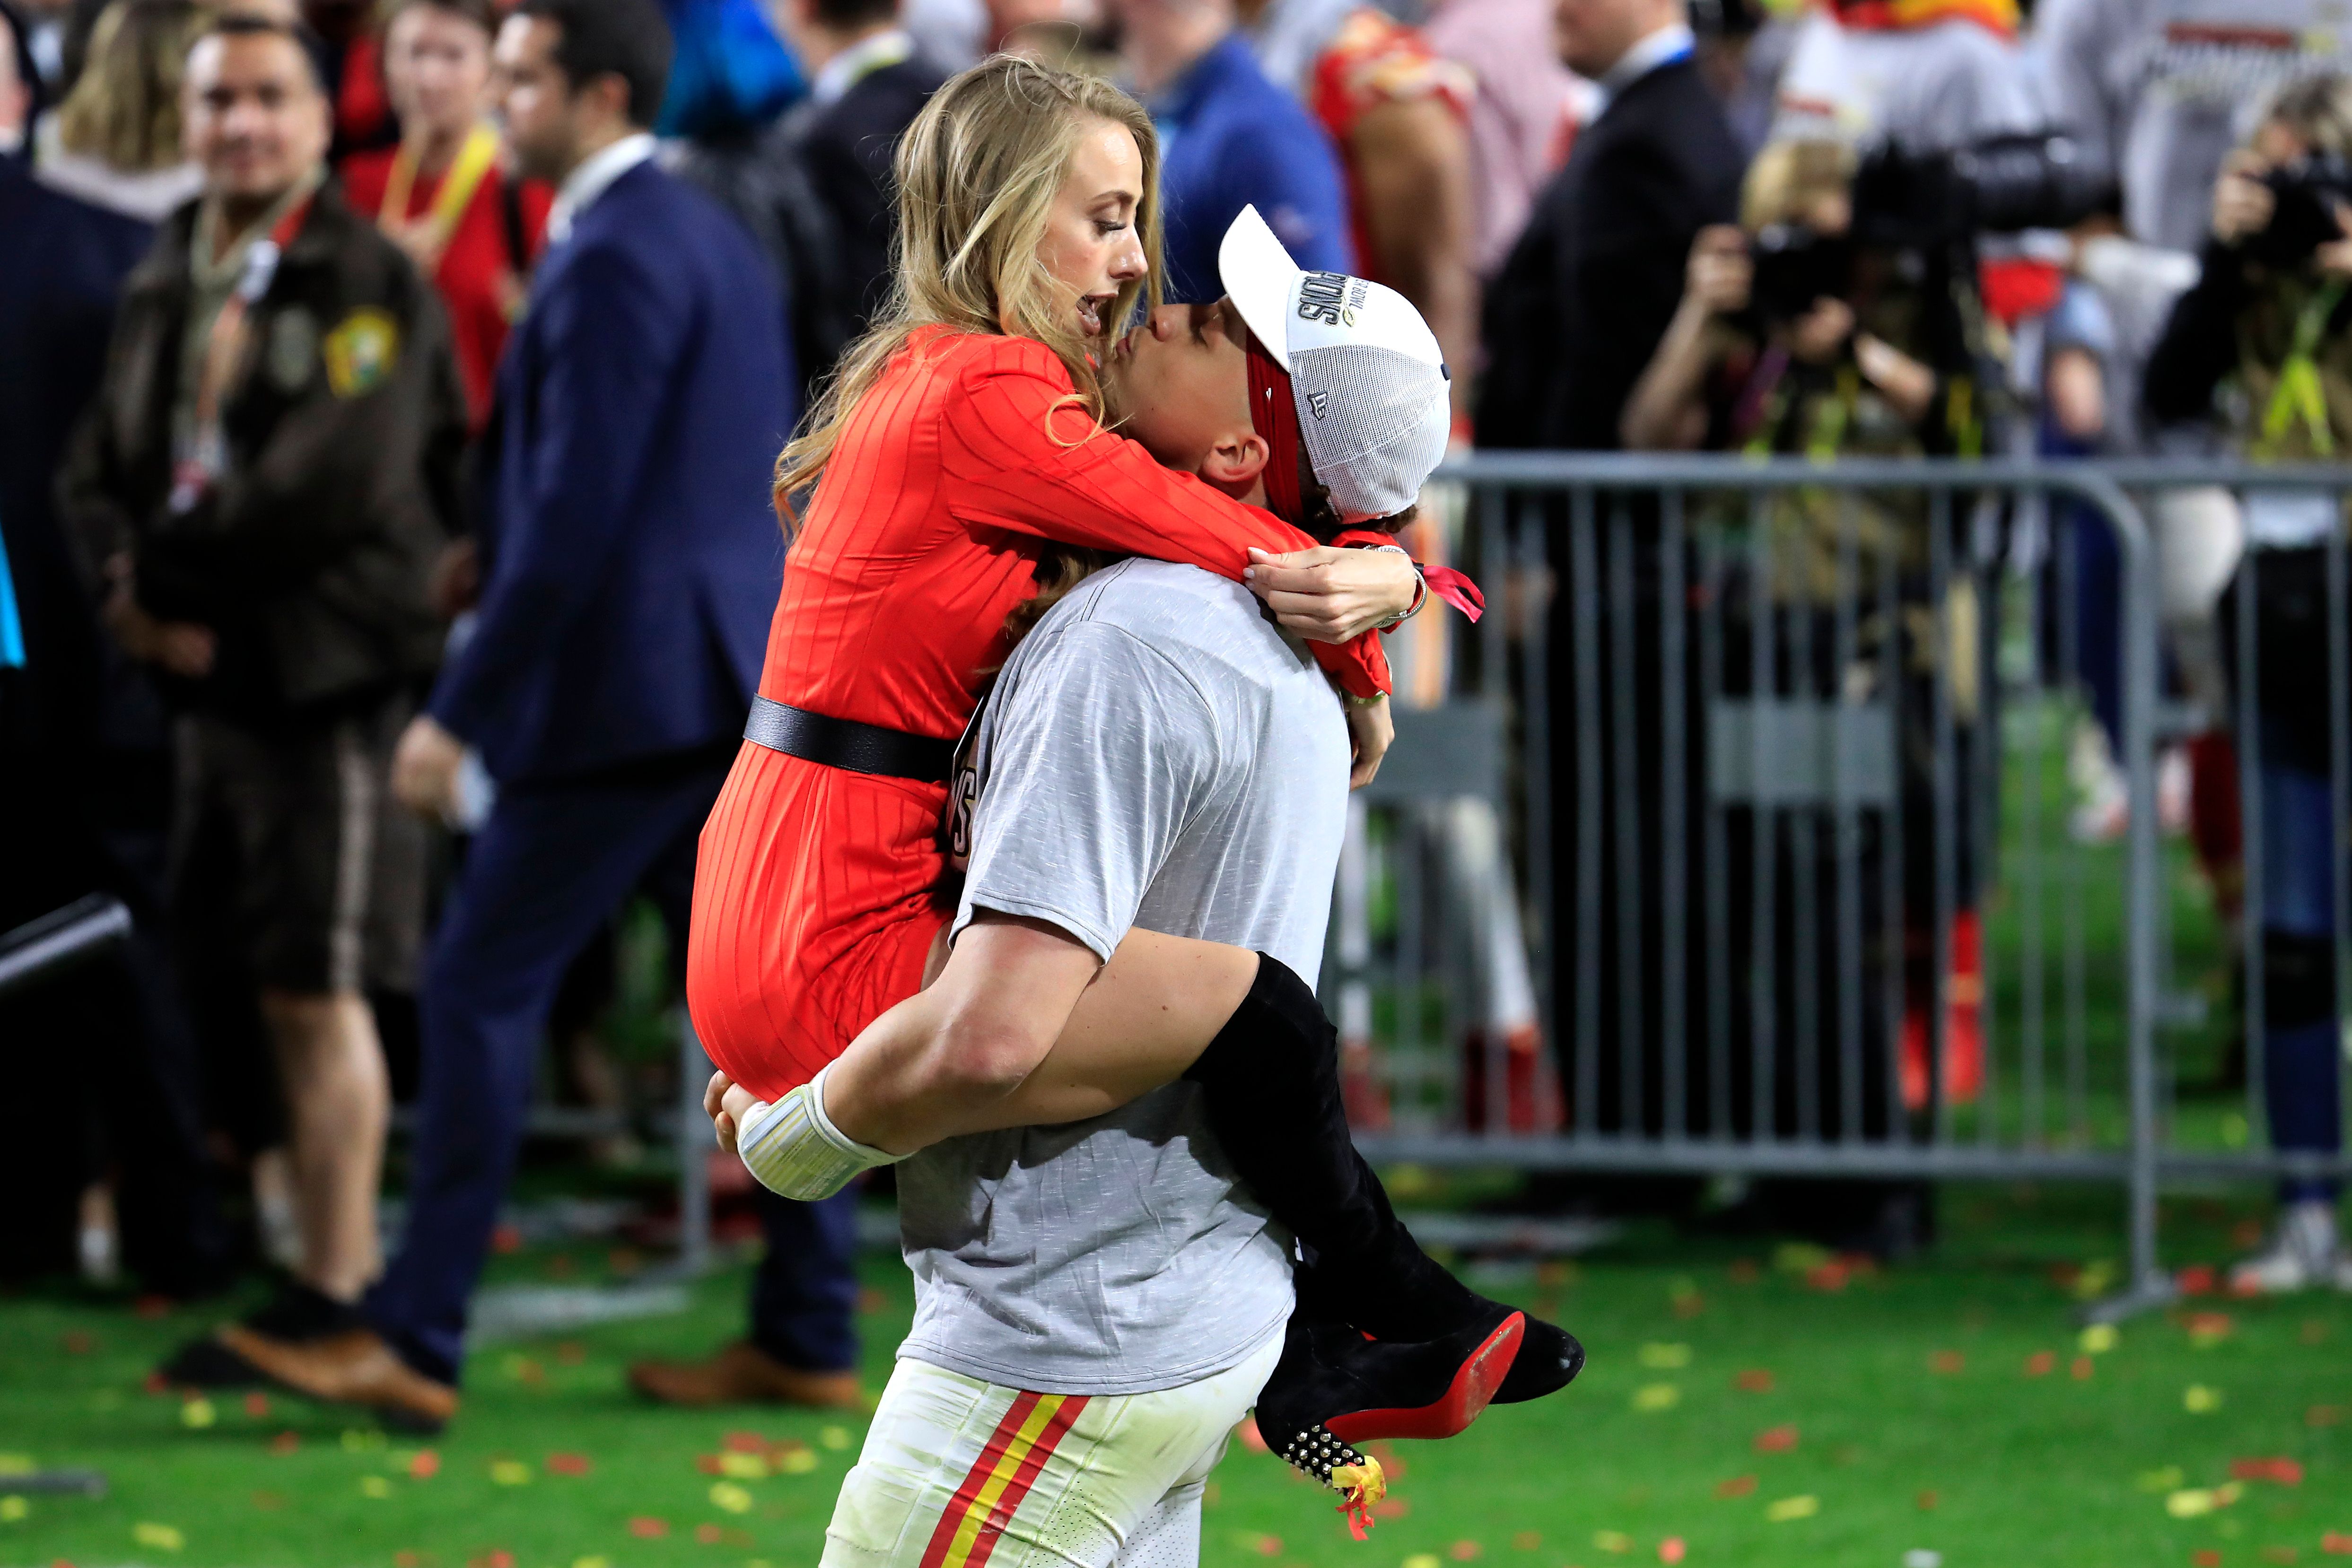  Patrick Mahomes celebrates with his girlfriend, Brittany Matthews, after defeating the San Francisco 49ers in the 2020 Super Bowl in Miami, Florida | Source: Getty Images